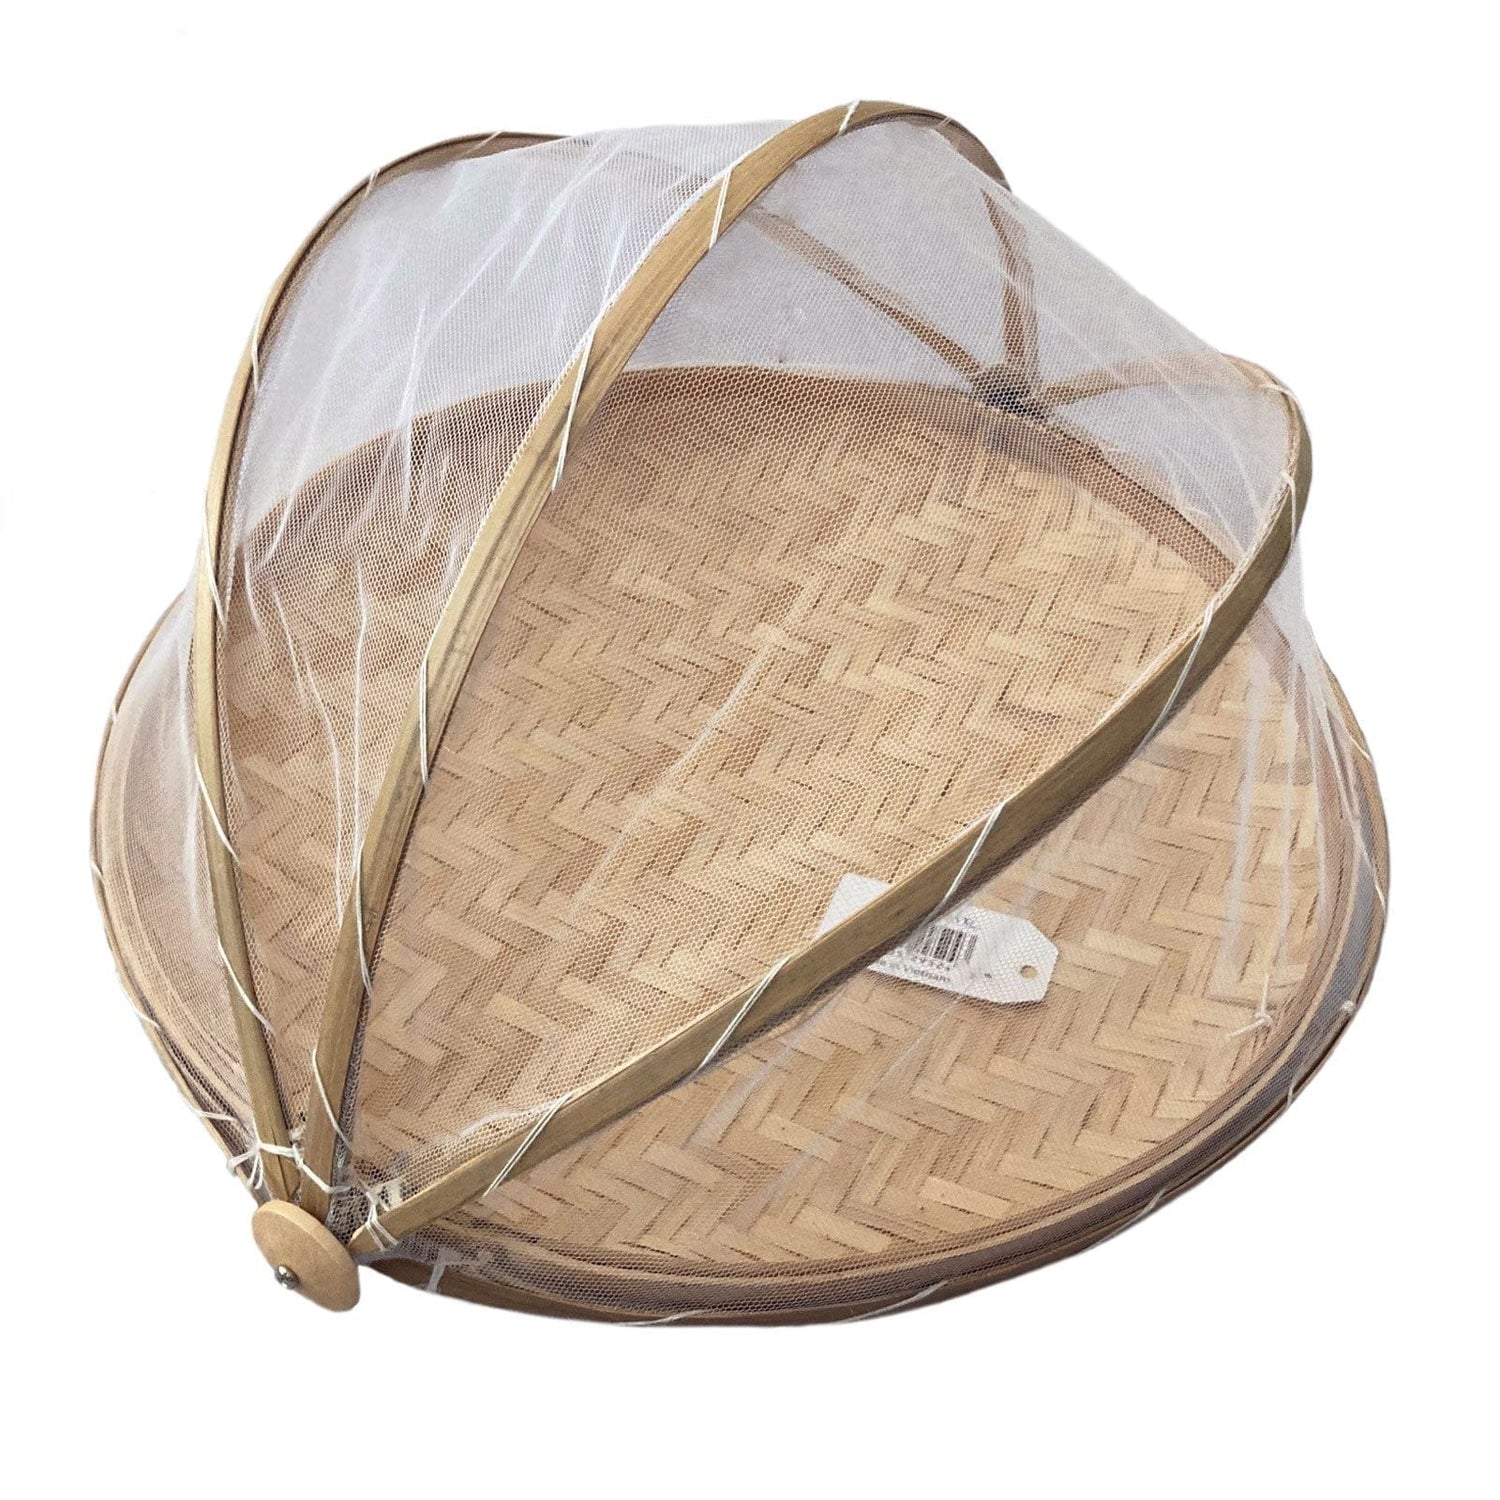 Large Mesh Food Cover with Bamboo Tray